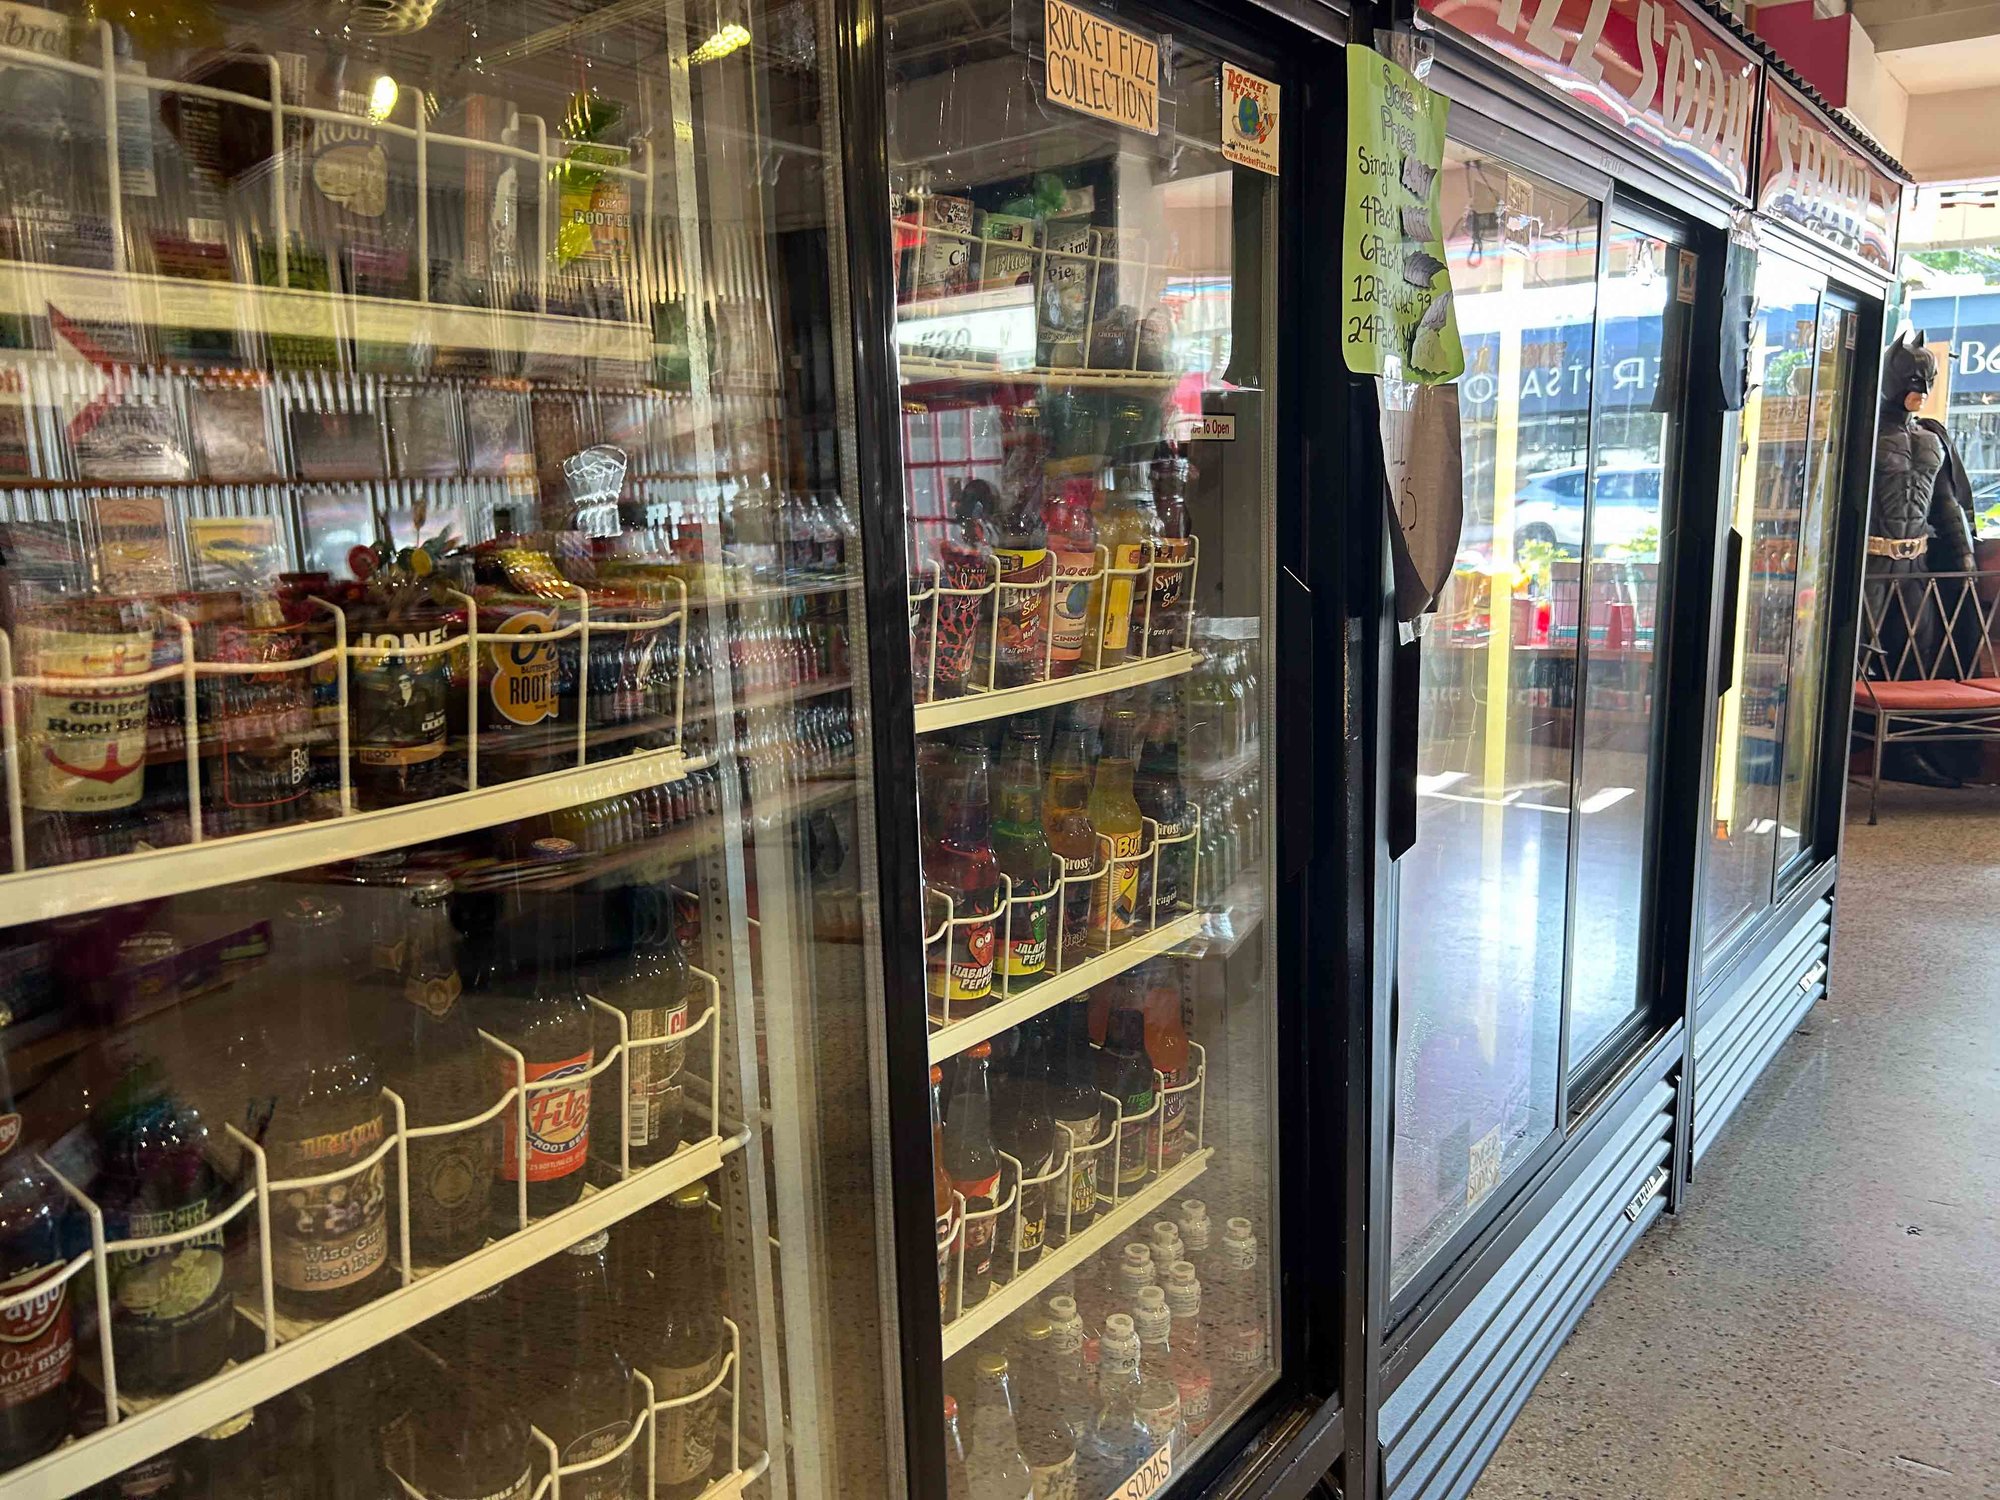 View of fridge with sodas inside